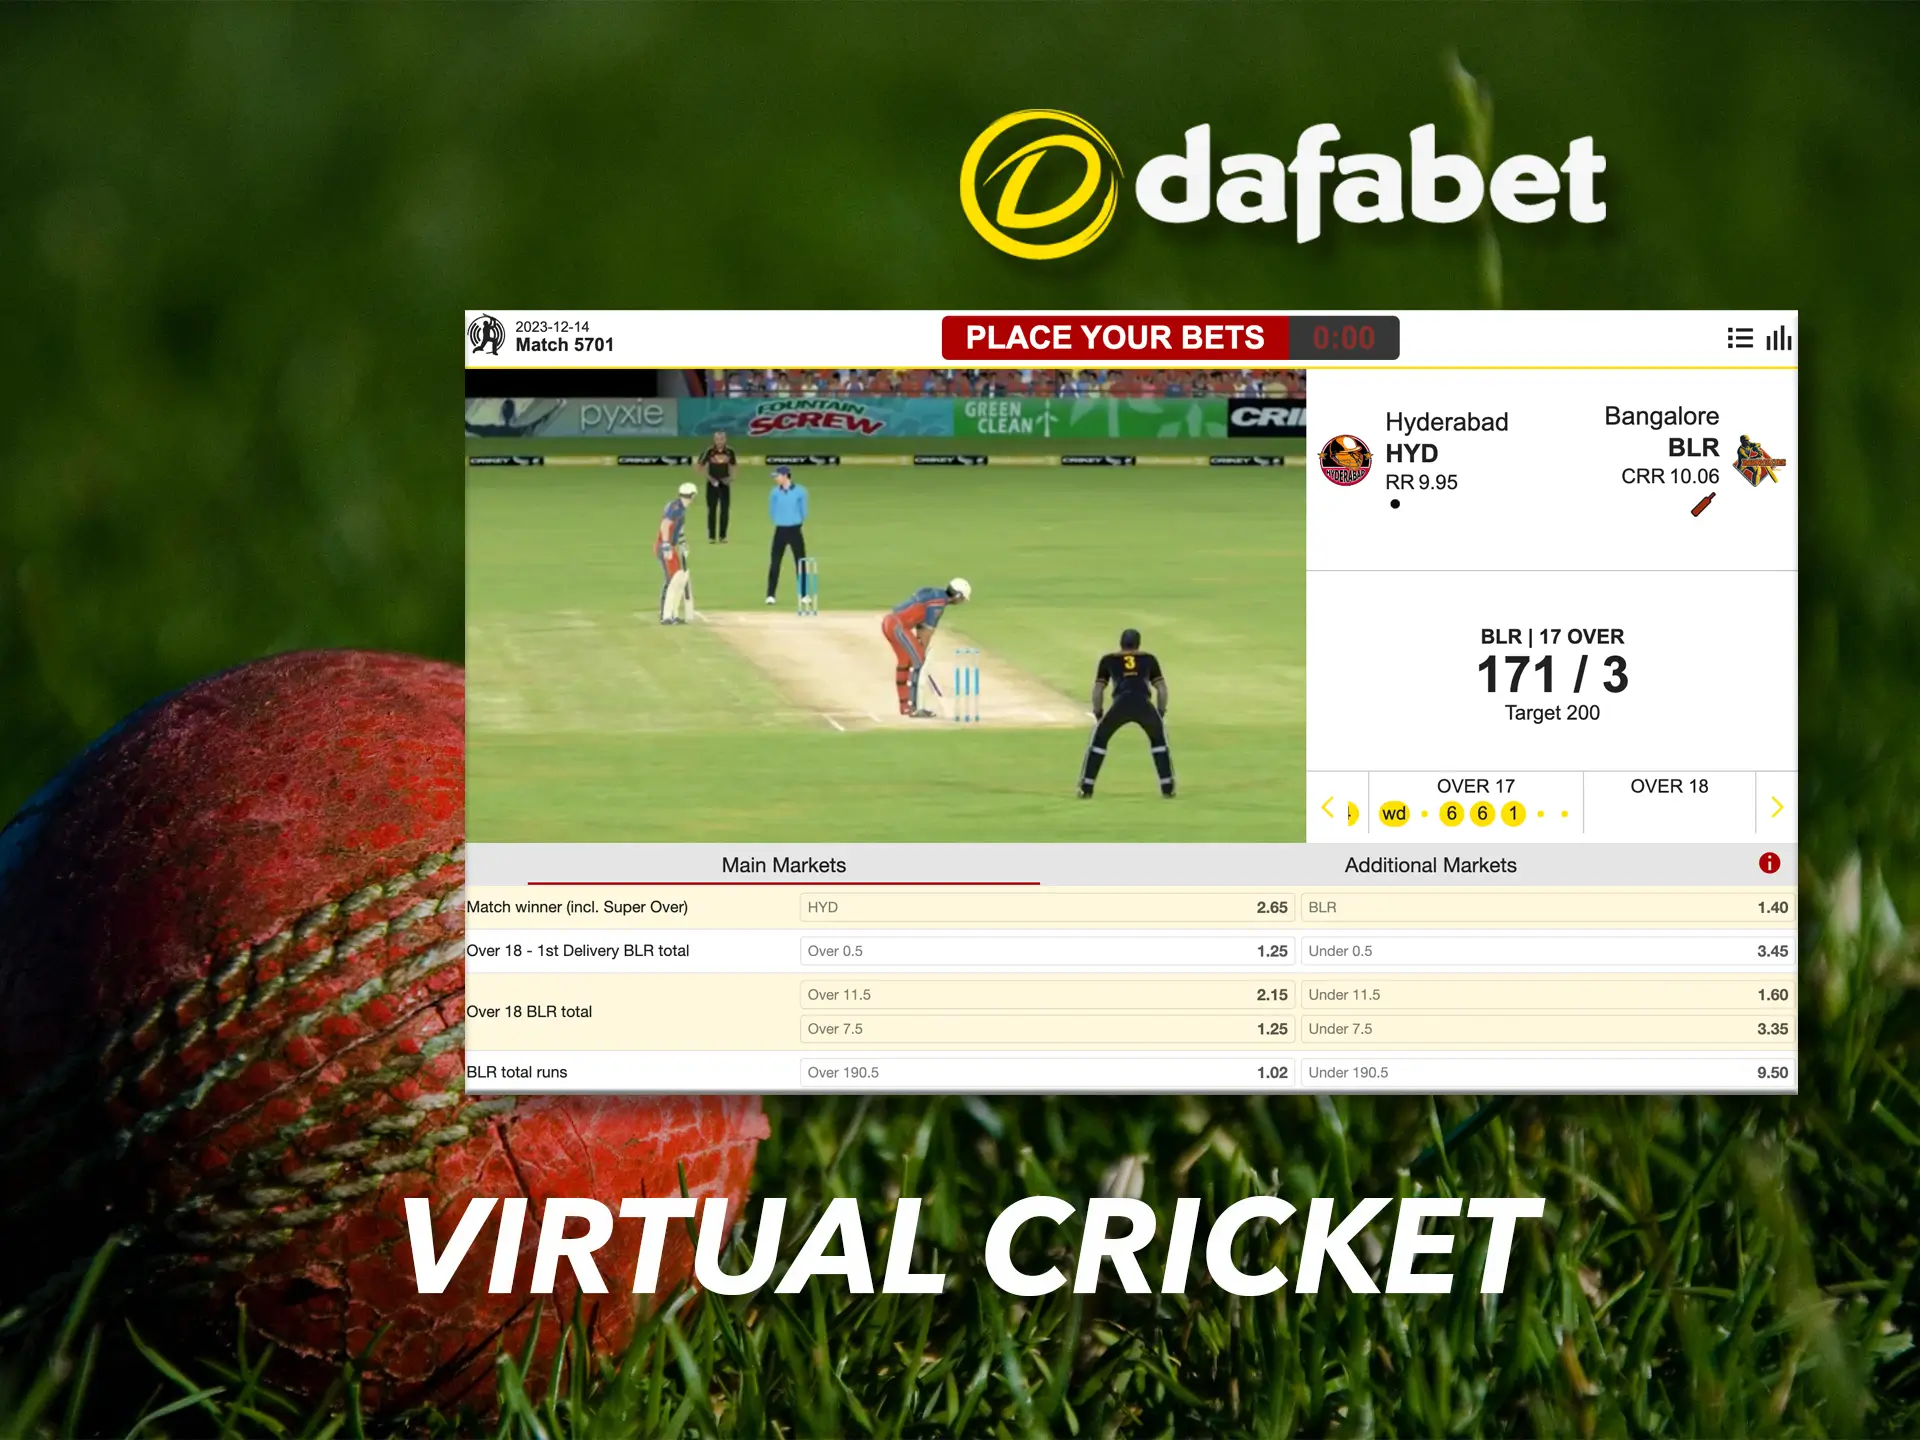 Find out more about virtual cricket on the Dafabet website.